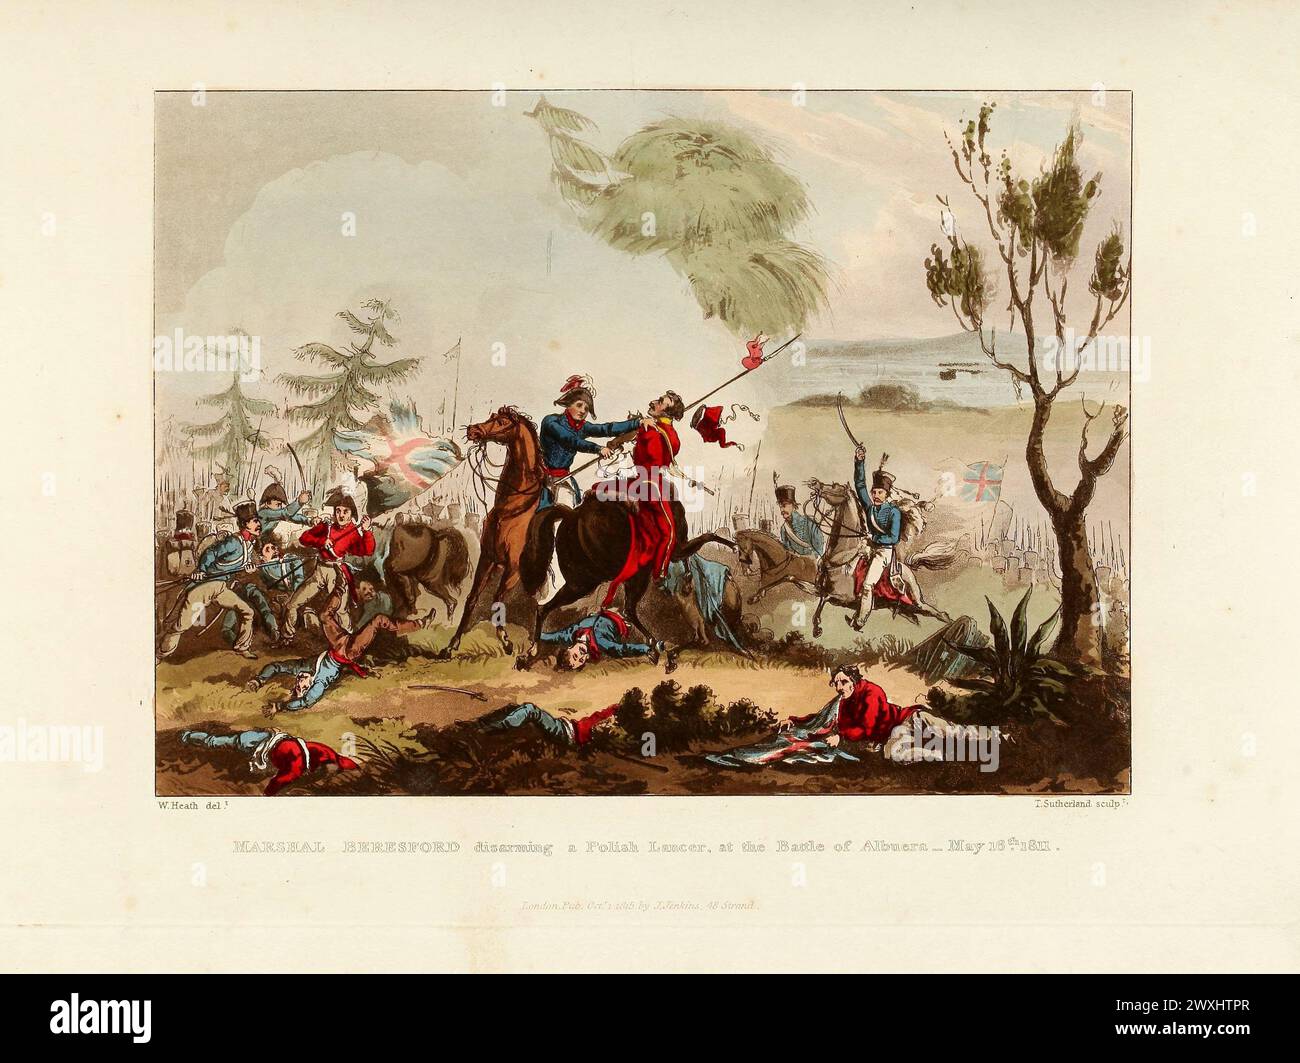 Marshal Beresford disarming a Polish Lancer, at the Battle of Albuera, May 16th, 1811. Vintage Coloured Aquatint, published by James Jenkins, 1815,  from  The martial achievements of Great Britain and her allies : from 1799 to 1815. Stock Photo